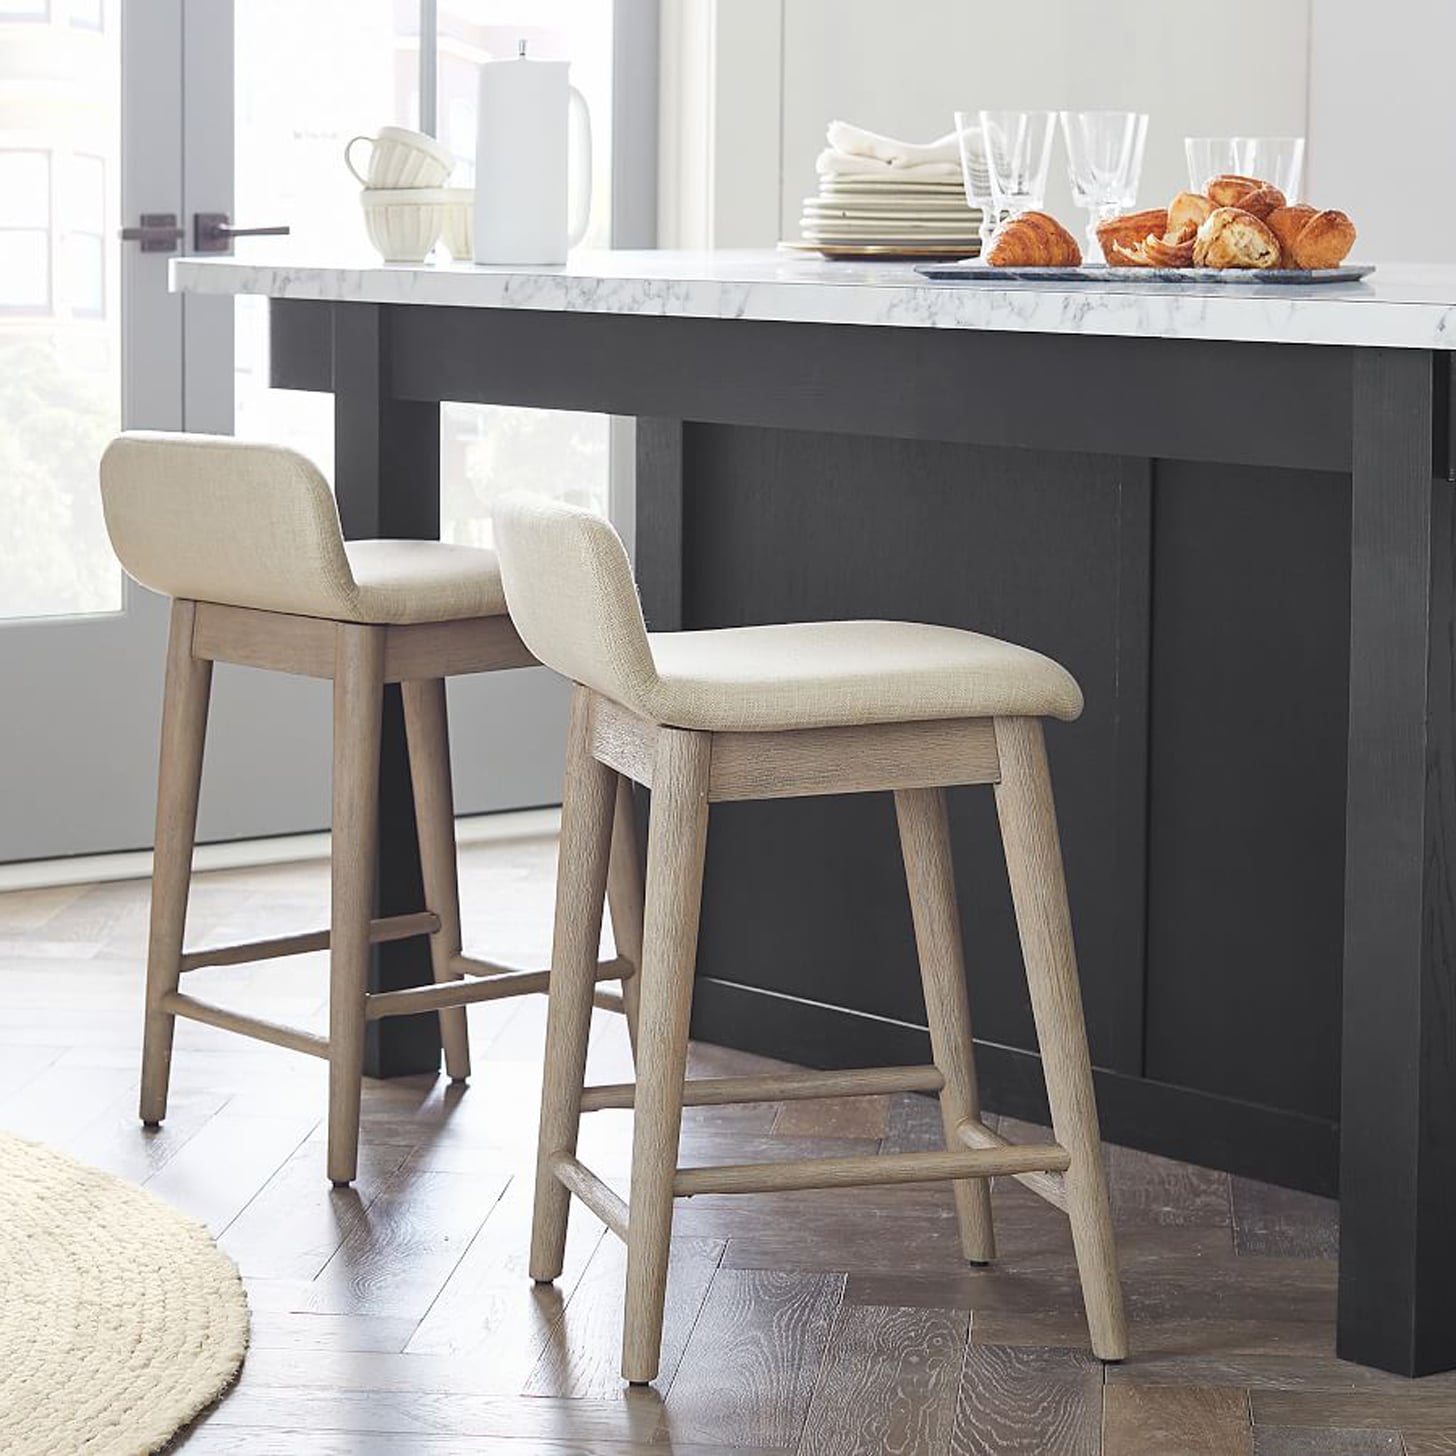 10 Best Counter Stools and Bar Stools to Shop in 2023 | POPSUGAR Home